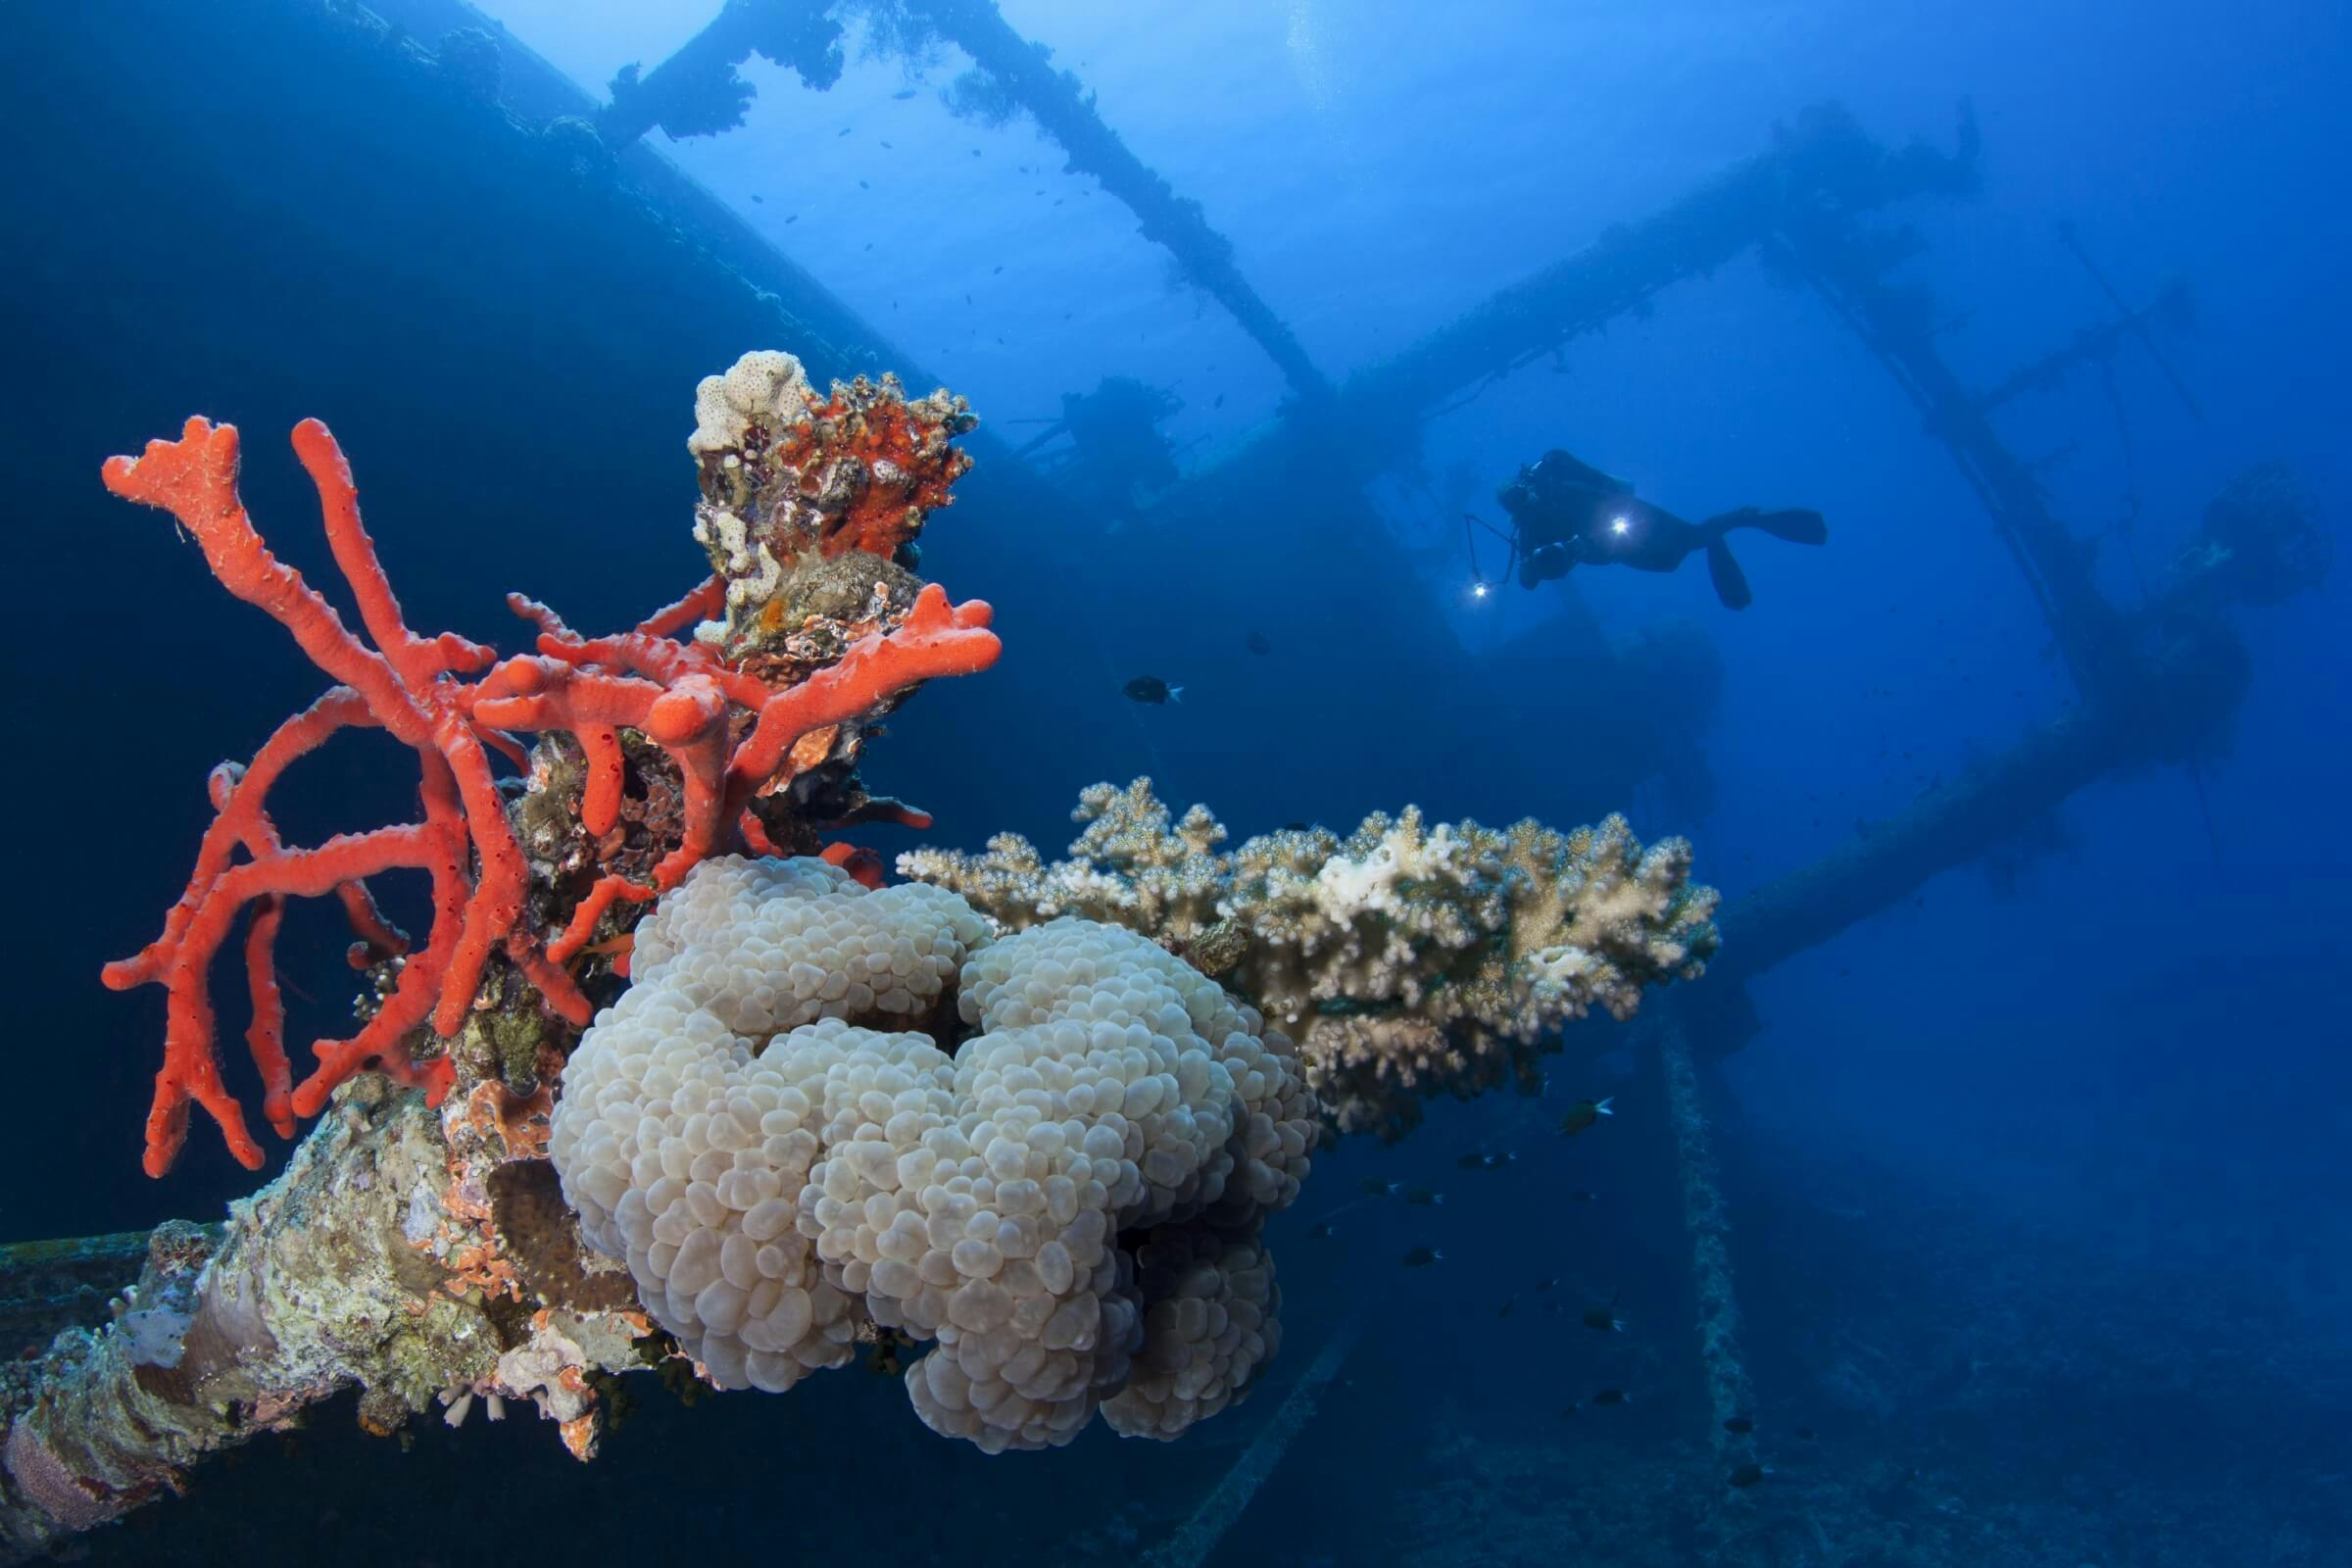 Red Sponge on the foreground, in the background a diver with a light explores an underwater wreck.